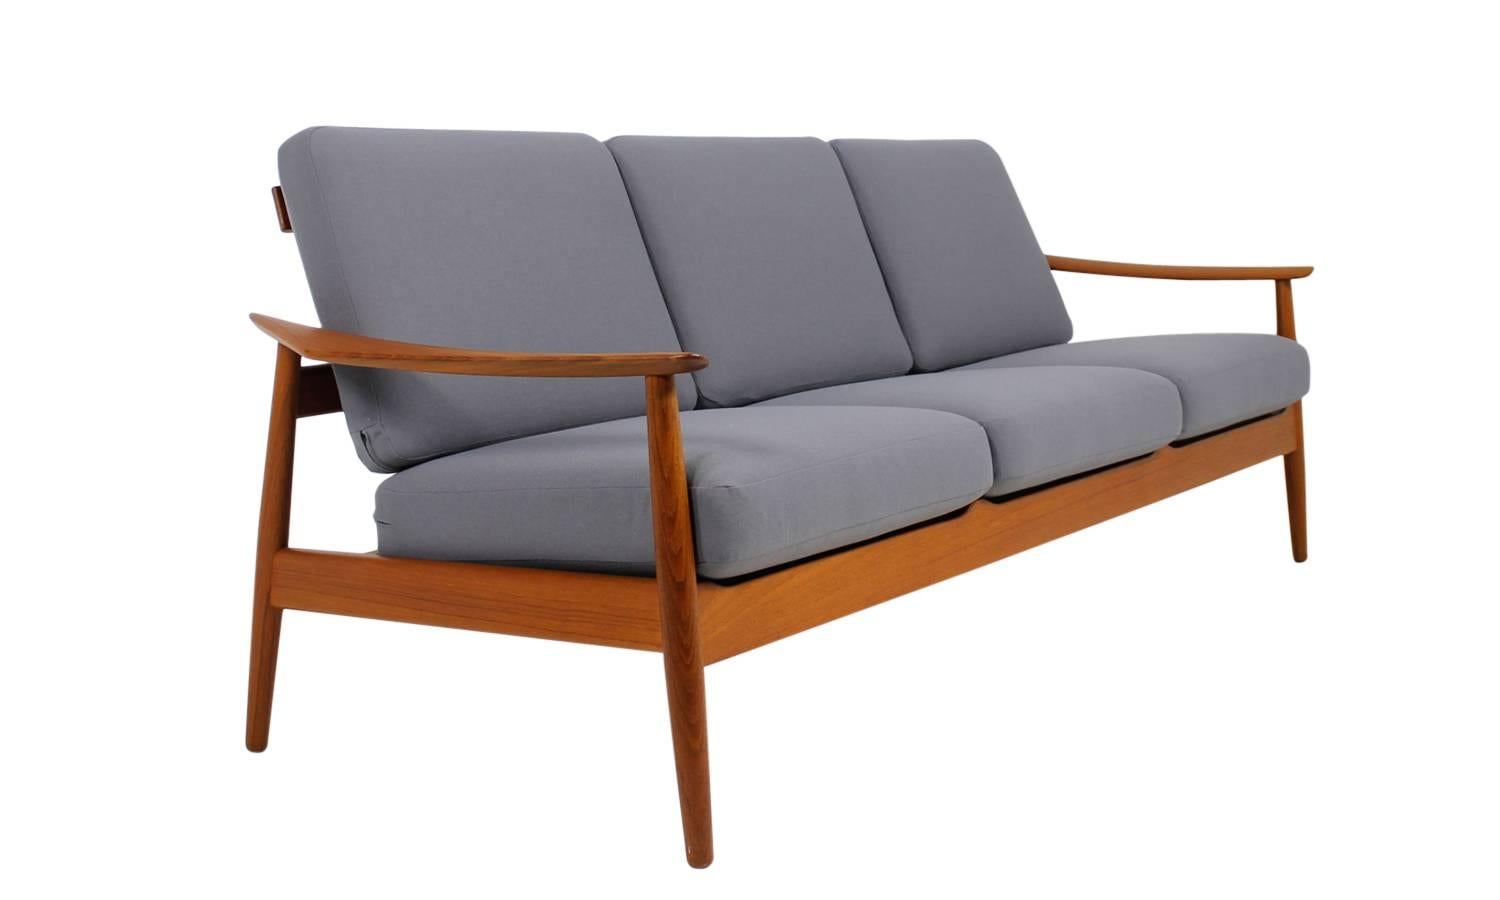 Beautiful 1960s Arne Vodder teak sofa, Danish modern design.
The innerspring cushions are reupholstered and covered with new grey woven fabric, really fantastic condition, like new, very clean, hard to find in this condition also a pair of matching